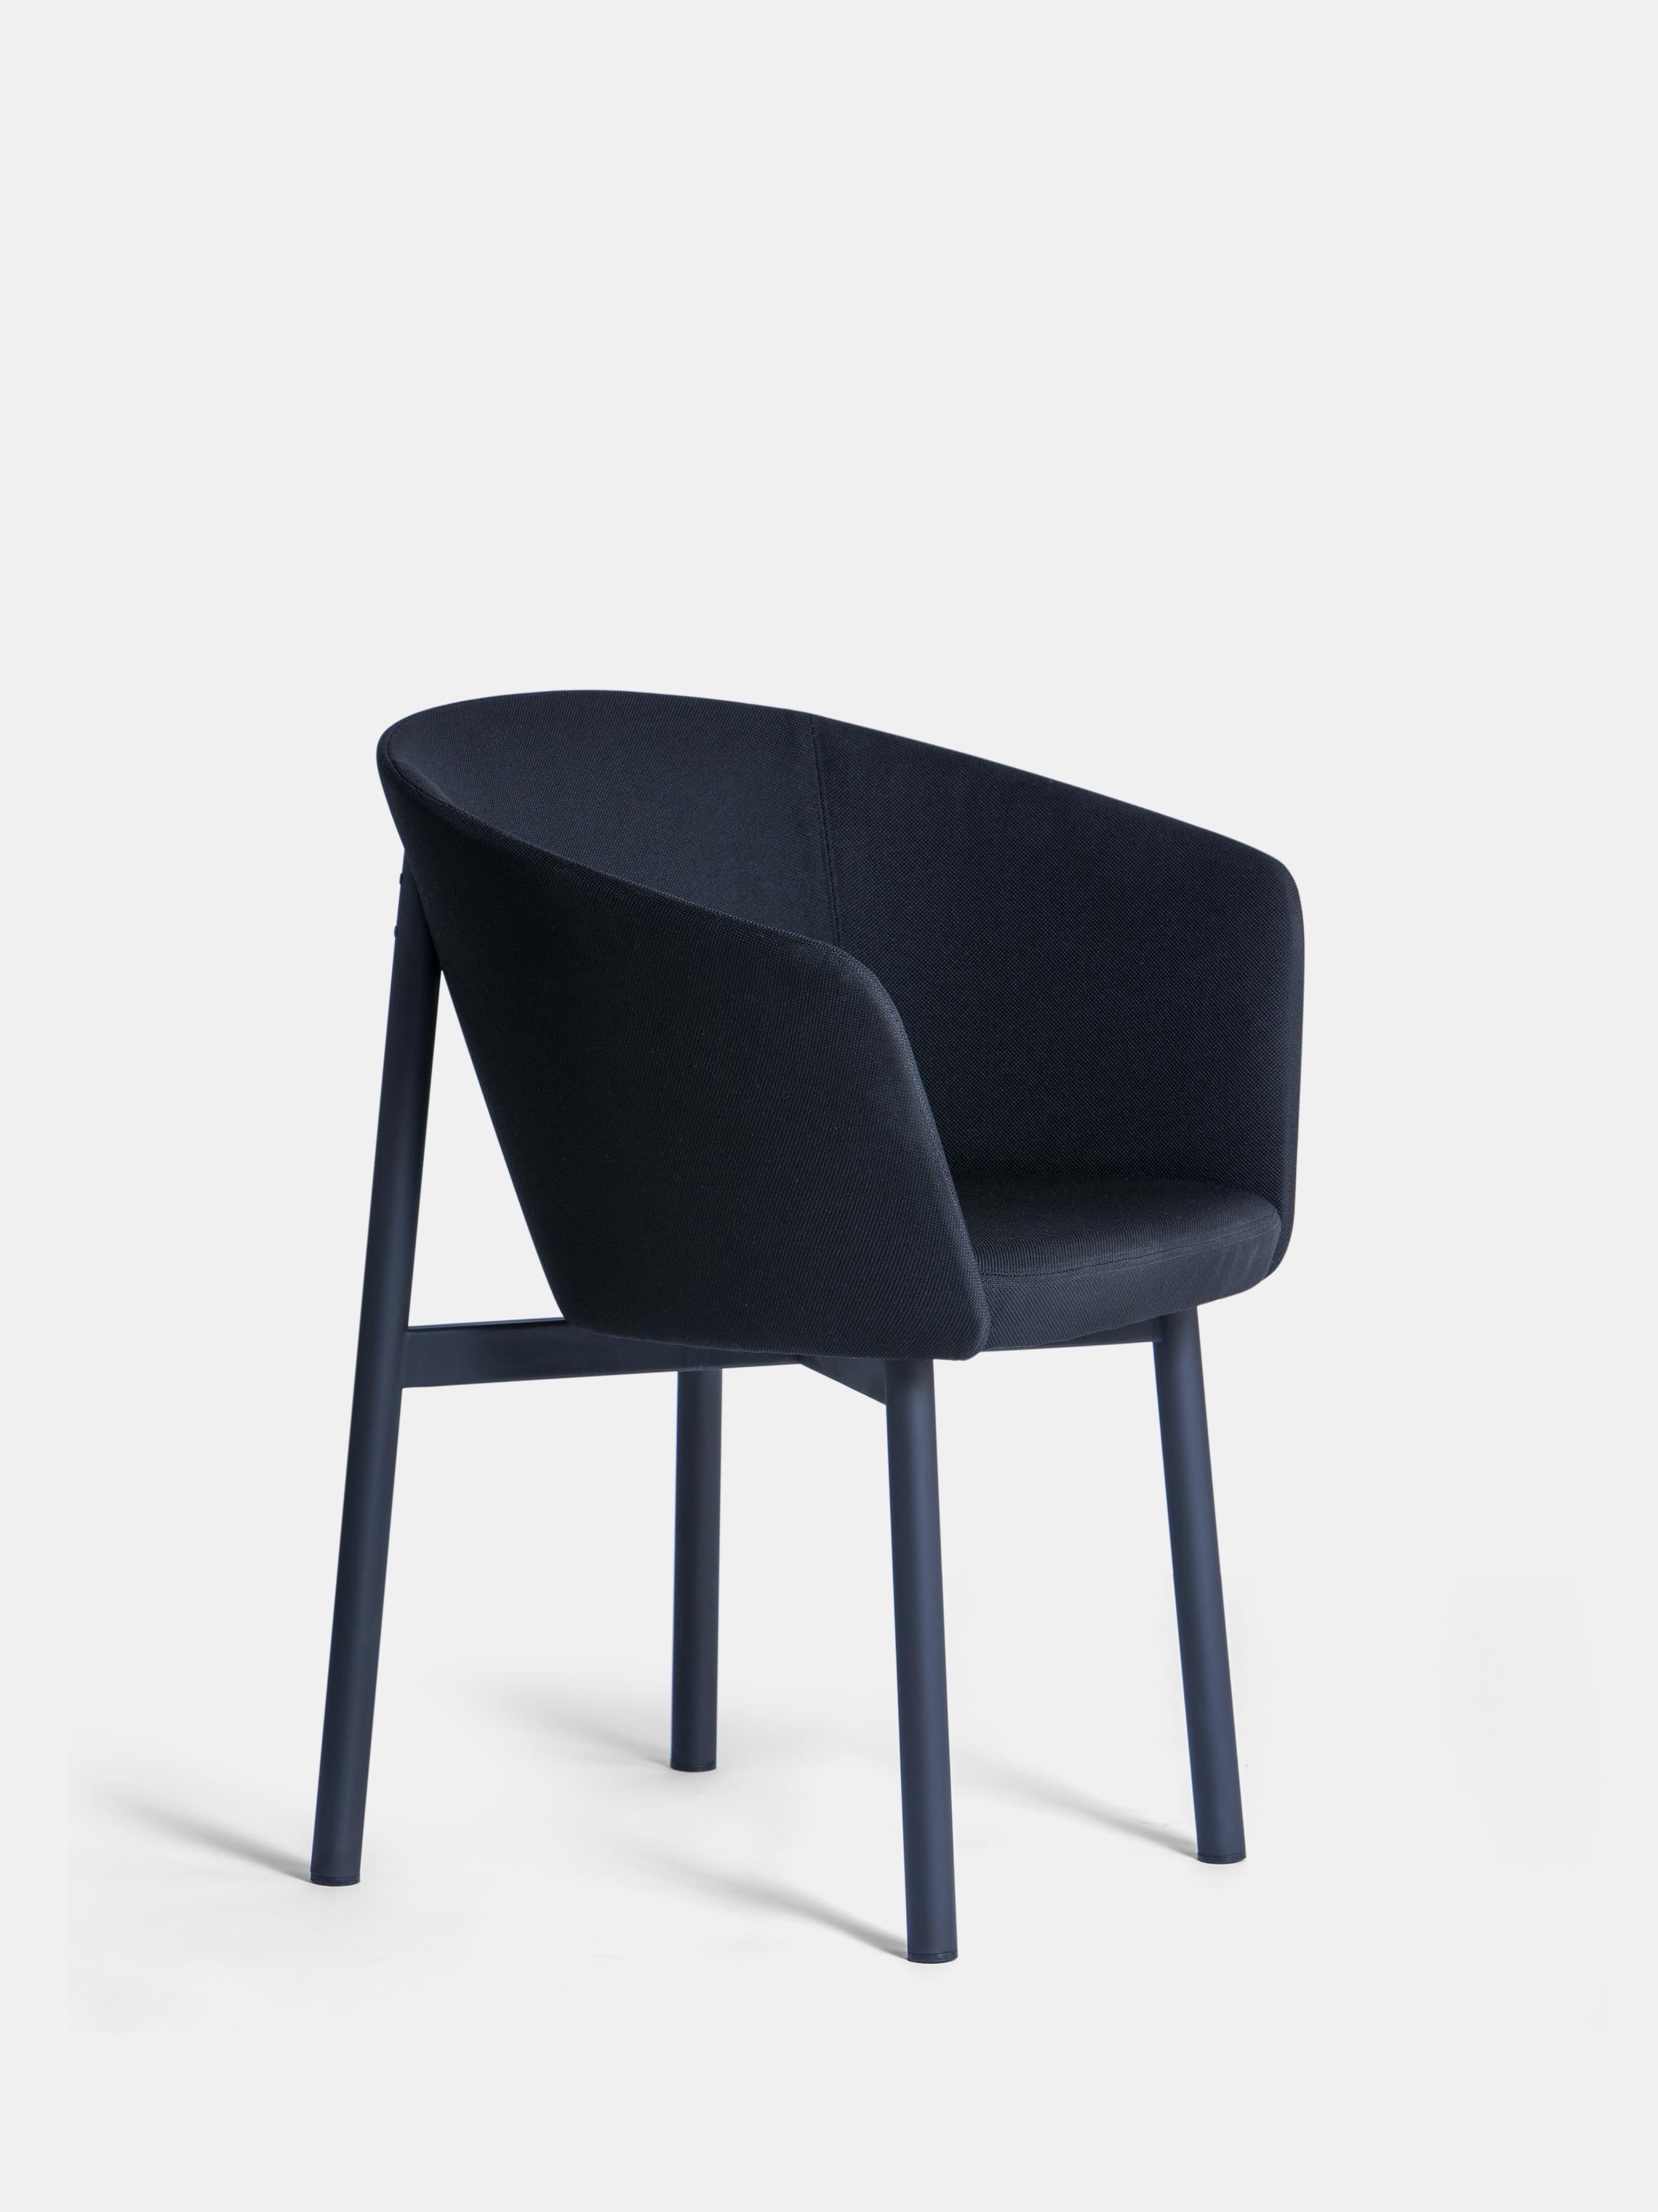 Set of 4 Black Residence Bridge Armchair by Kann Design
Dimensions: D 52 x W 59.5 x H 80 cm.
Materials: Steel tube, HR foam, fabric upholstery Kvadrat Relate 191 (100% Trevira).
Available in other fabrics.

All of the Residence seats were created by